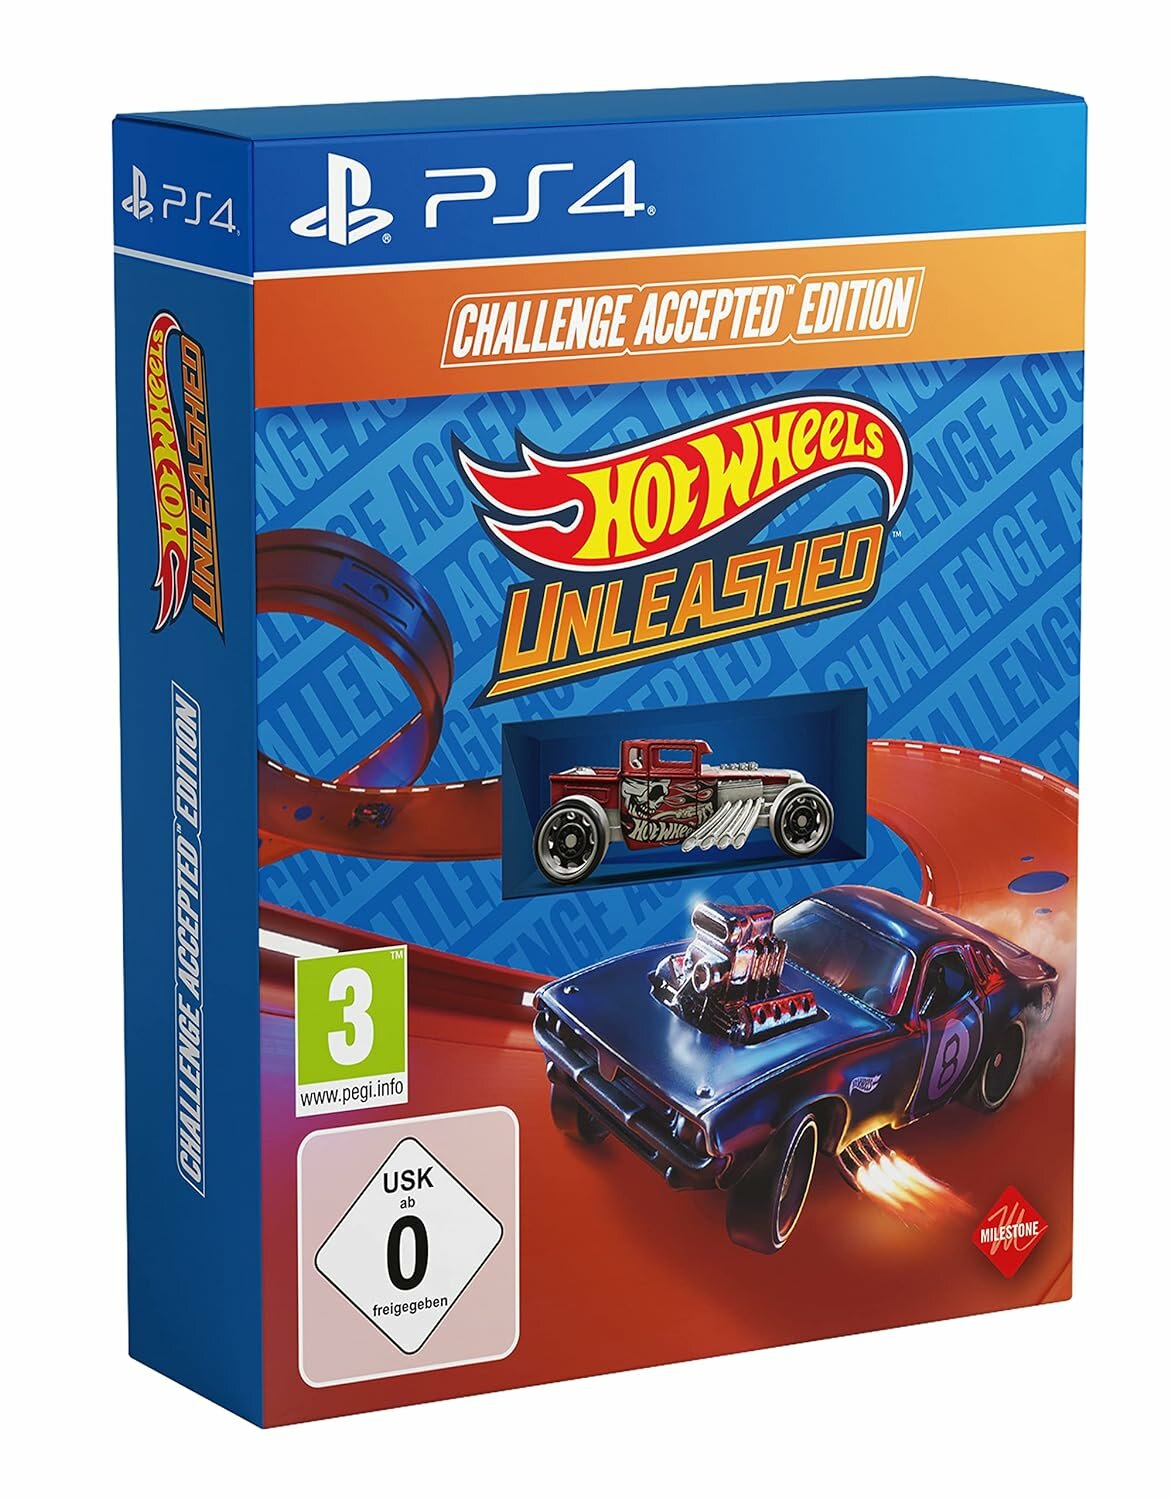 Hot Wheels Unleashed Challenge Accepted Edition (с машинкой) PS4, русские субтитры